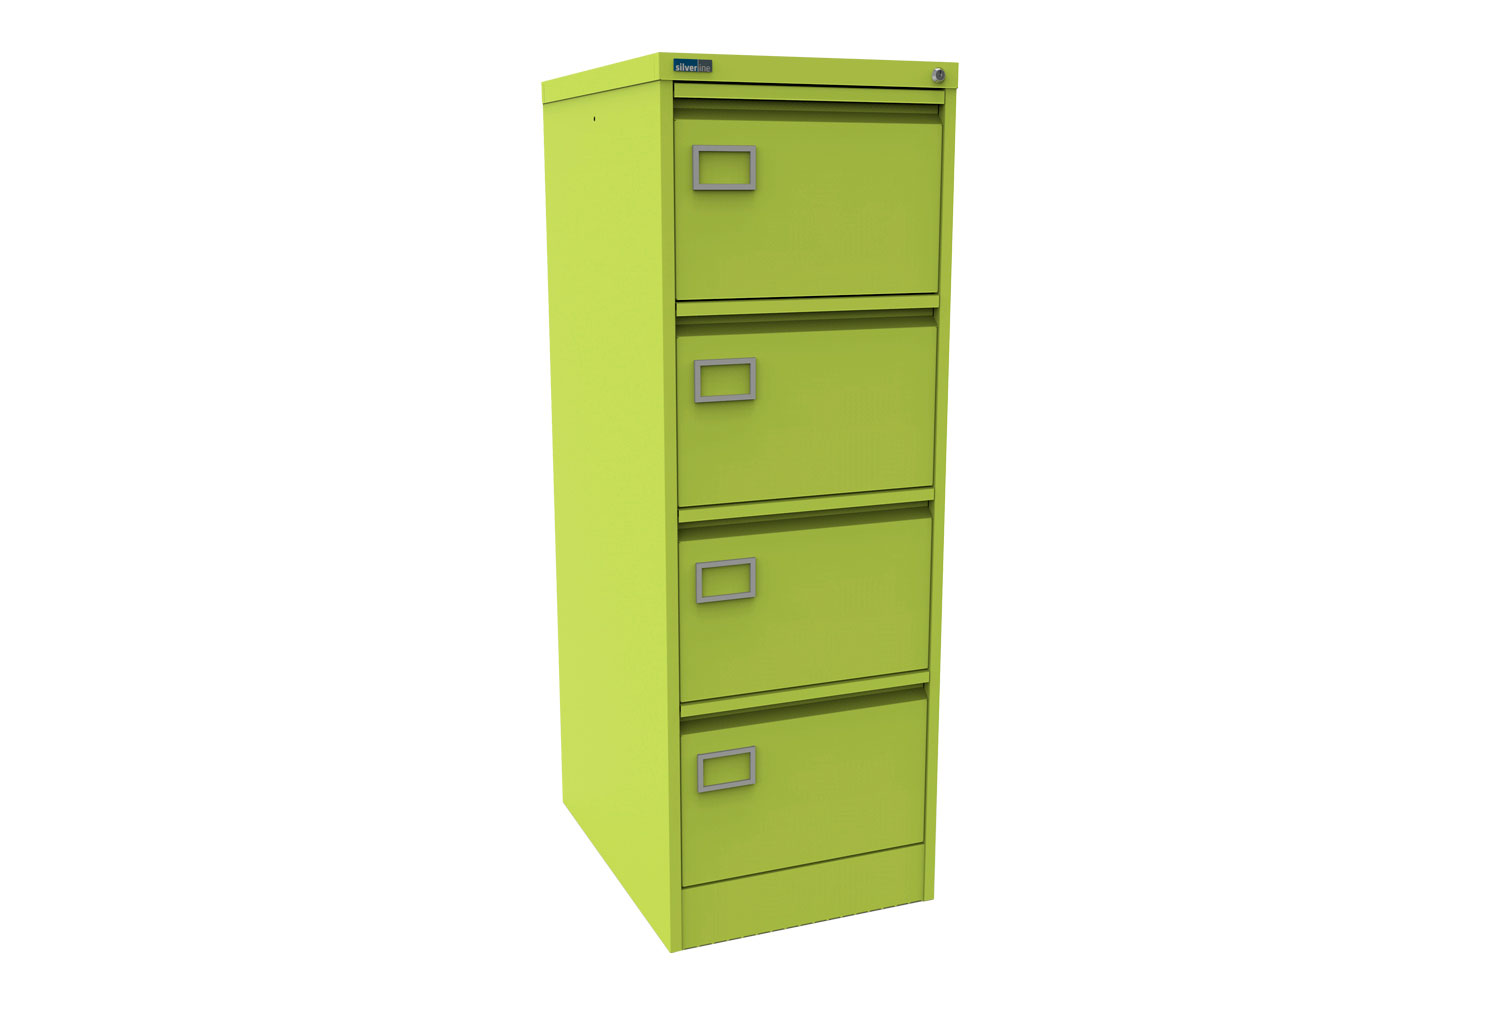 Silverline Executive 4 Drawer Filing Cabinets, 4 Drawer - 40wx62dx132h (cm), Chlorine, Fully Installed